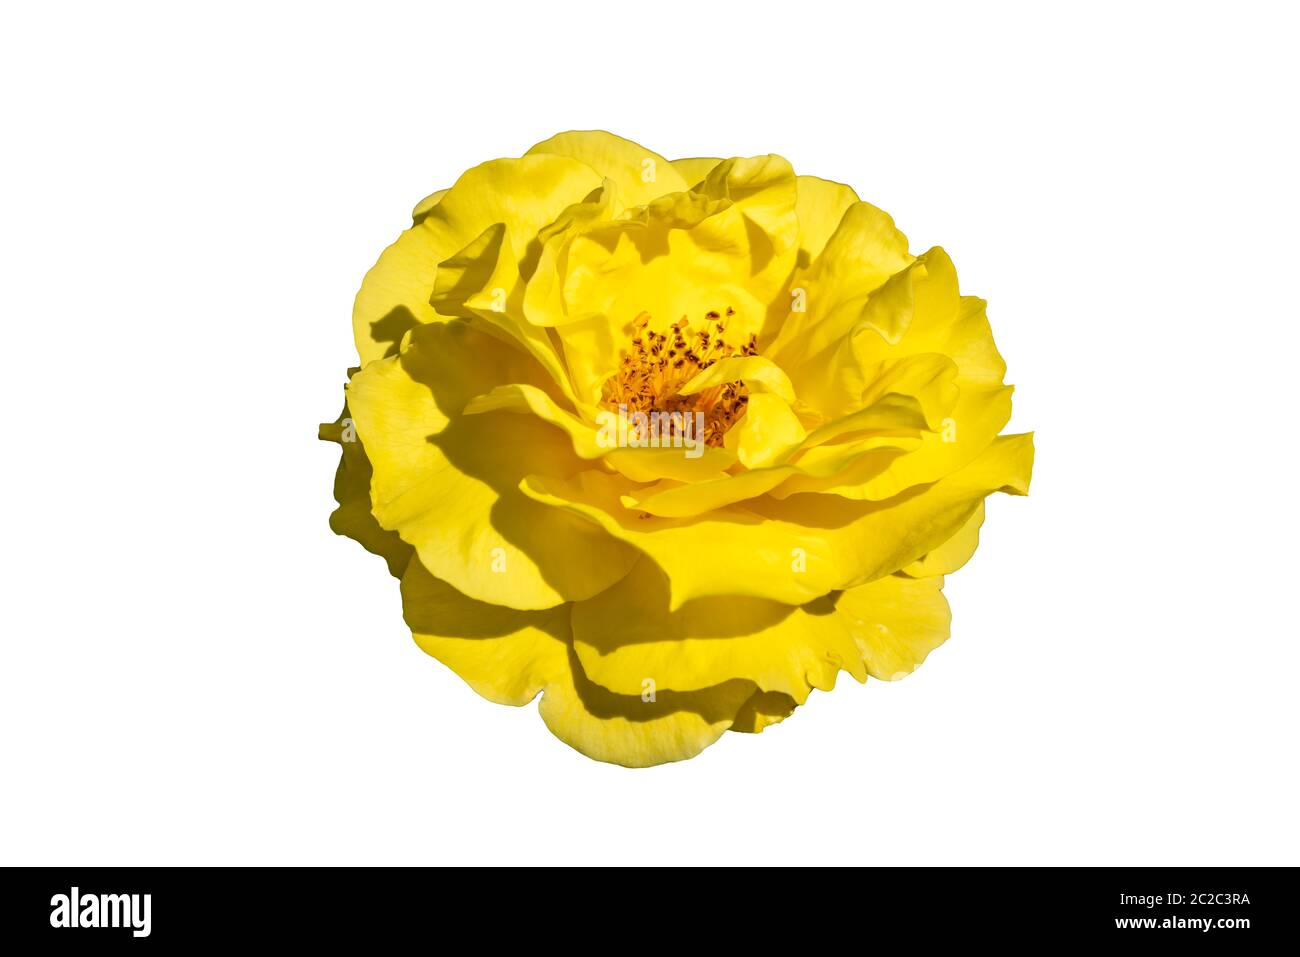 Rosa 'Korlillub' a yellow double flower summer autumn season plant cut out and isolate on a white background Stock Photo